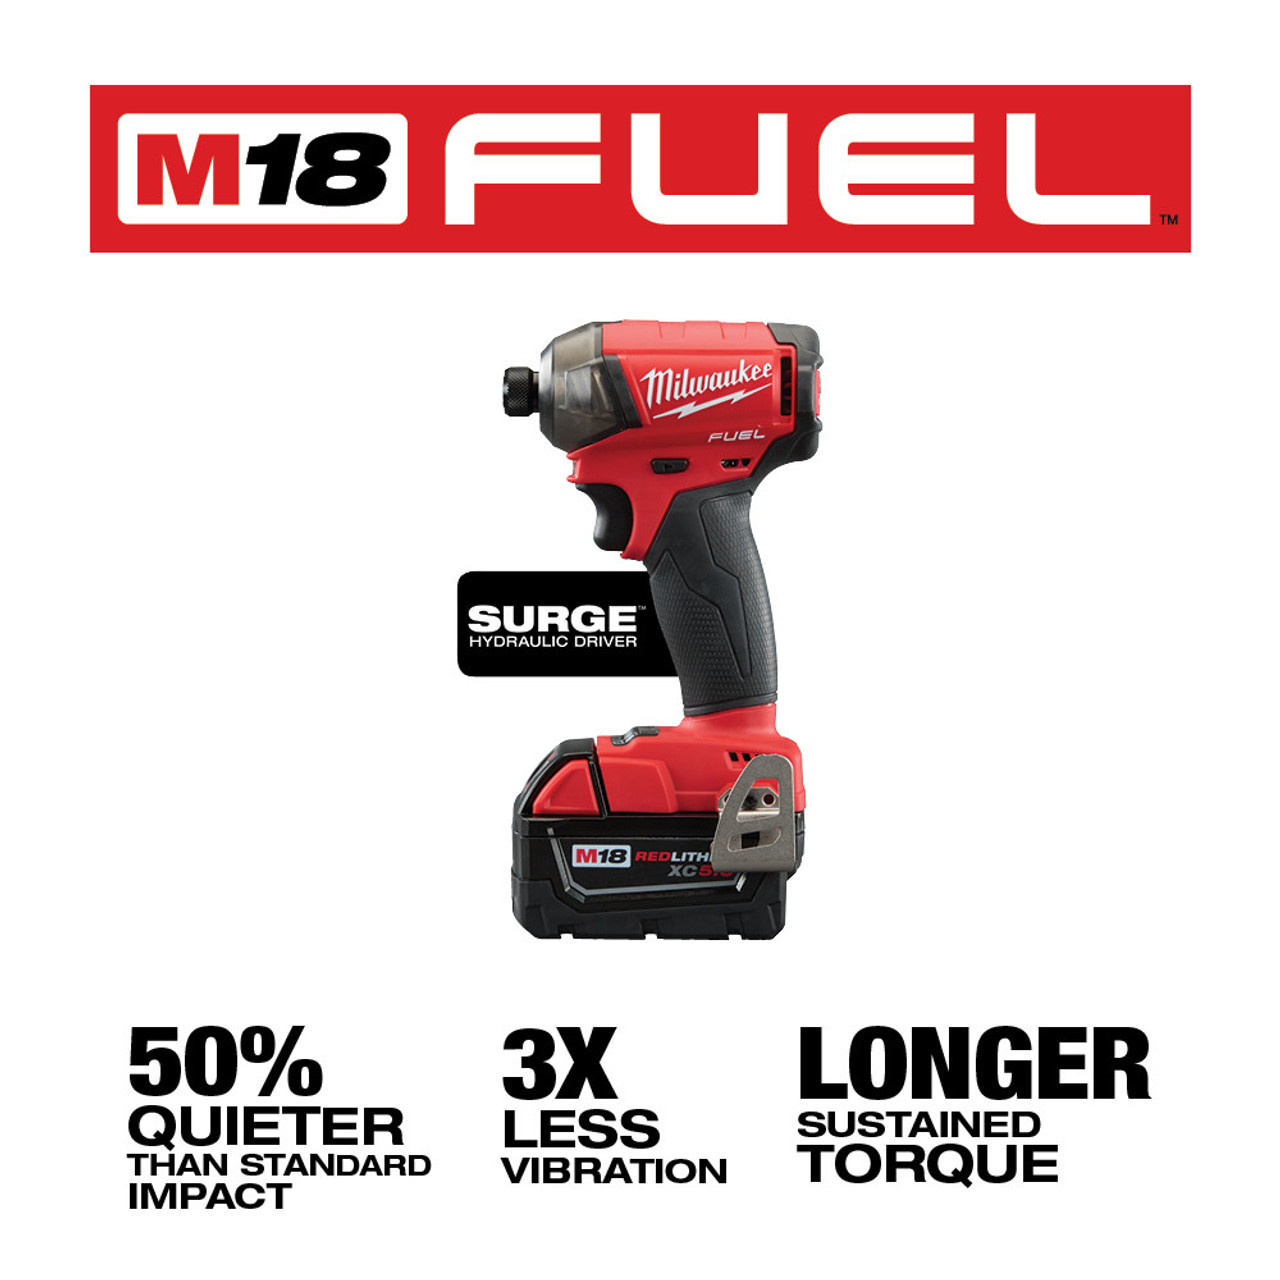 M18 FUEL 18 Volt Lithium-Ion Brushless Cordless 2-Tool Combo Kit (FUEL  Drywall Gun/SURGE Hydraulic Driver)